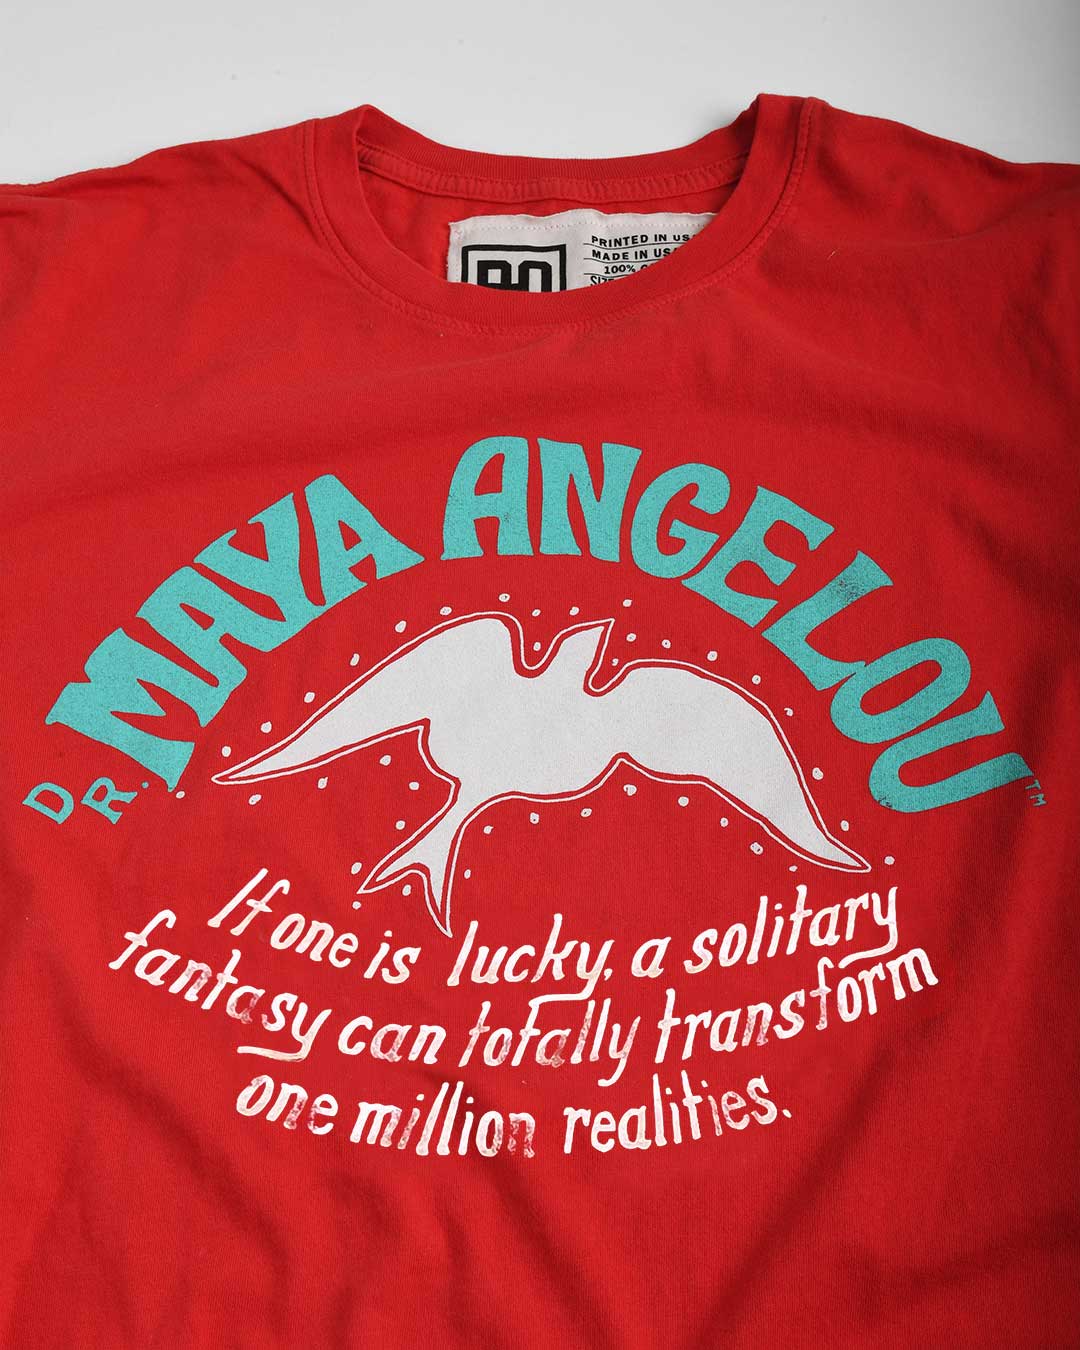 BHT - Maya Angelou Red Tee - Roots of Fight